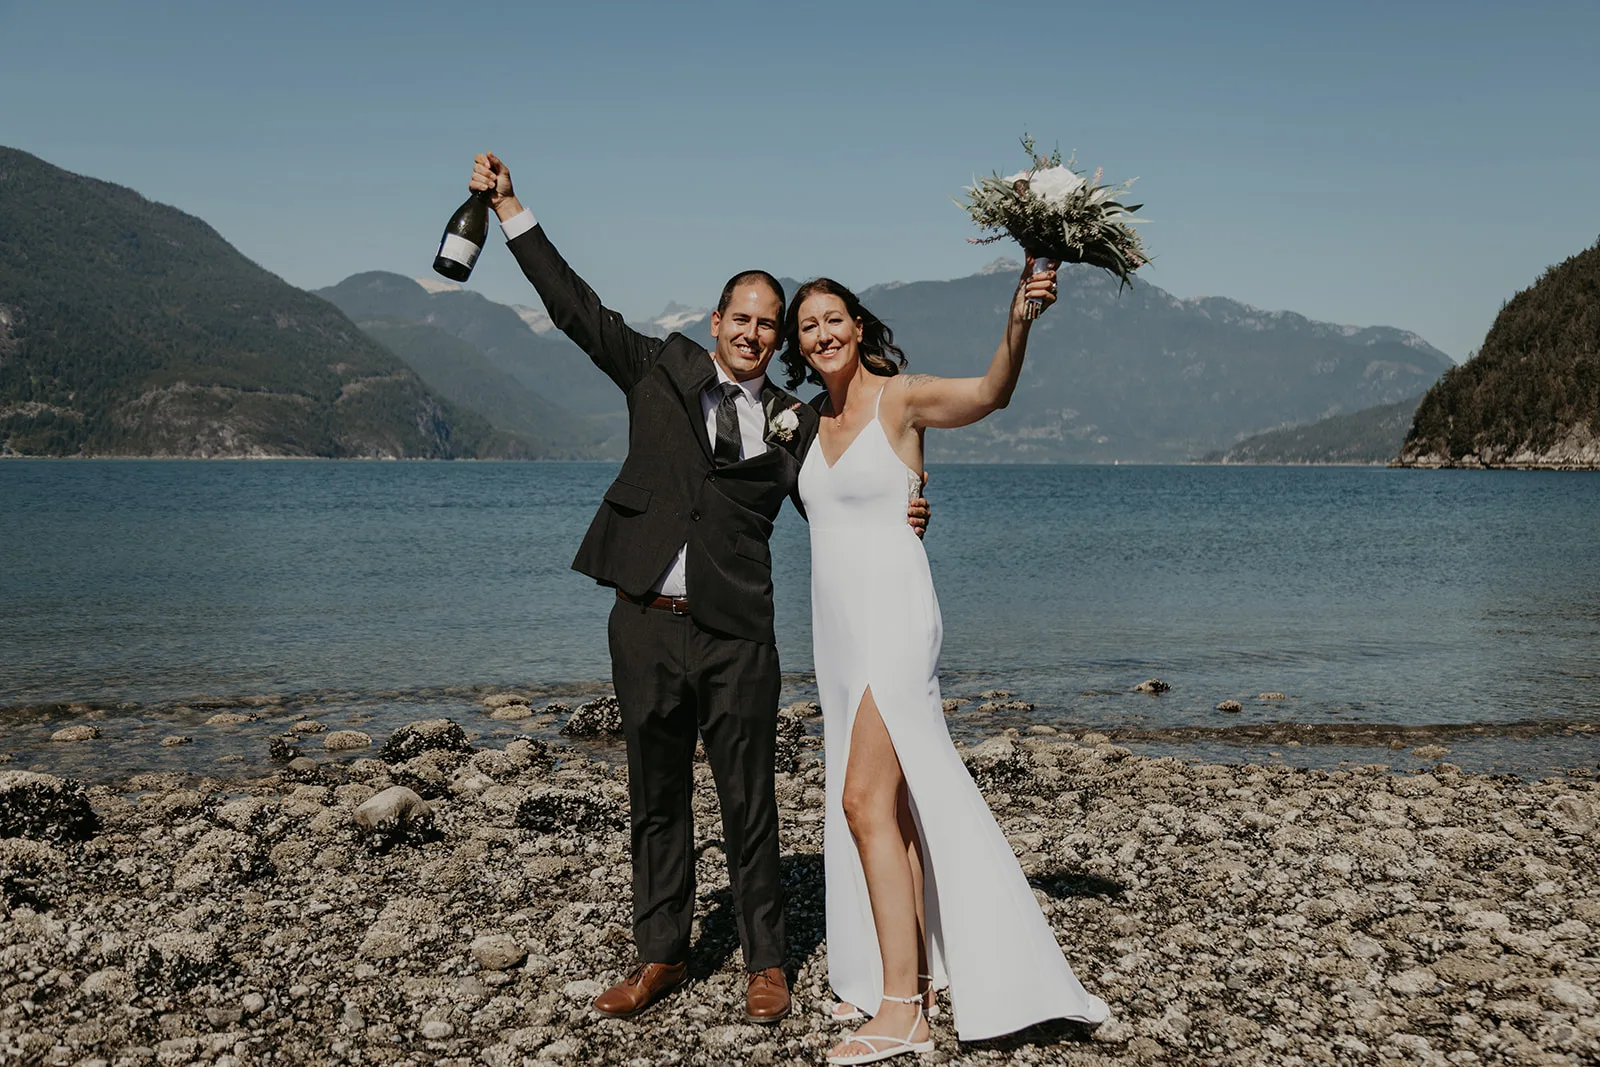 Bride and groom celebrate after their ceremony by holding up a bottle of champagne and a bouquet